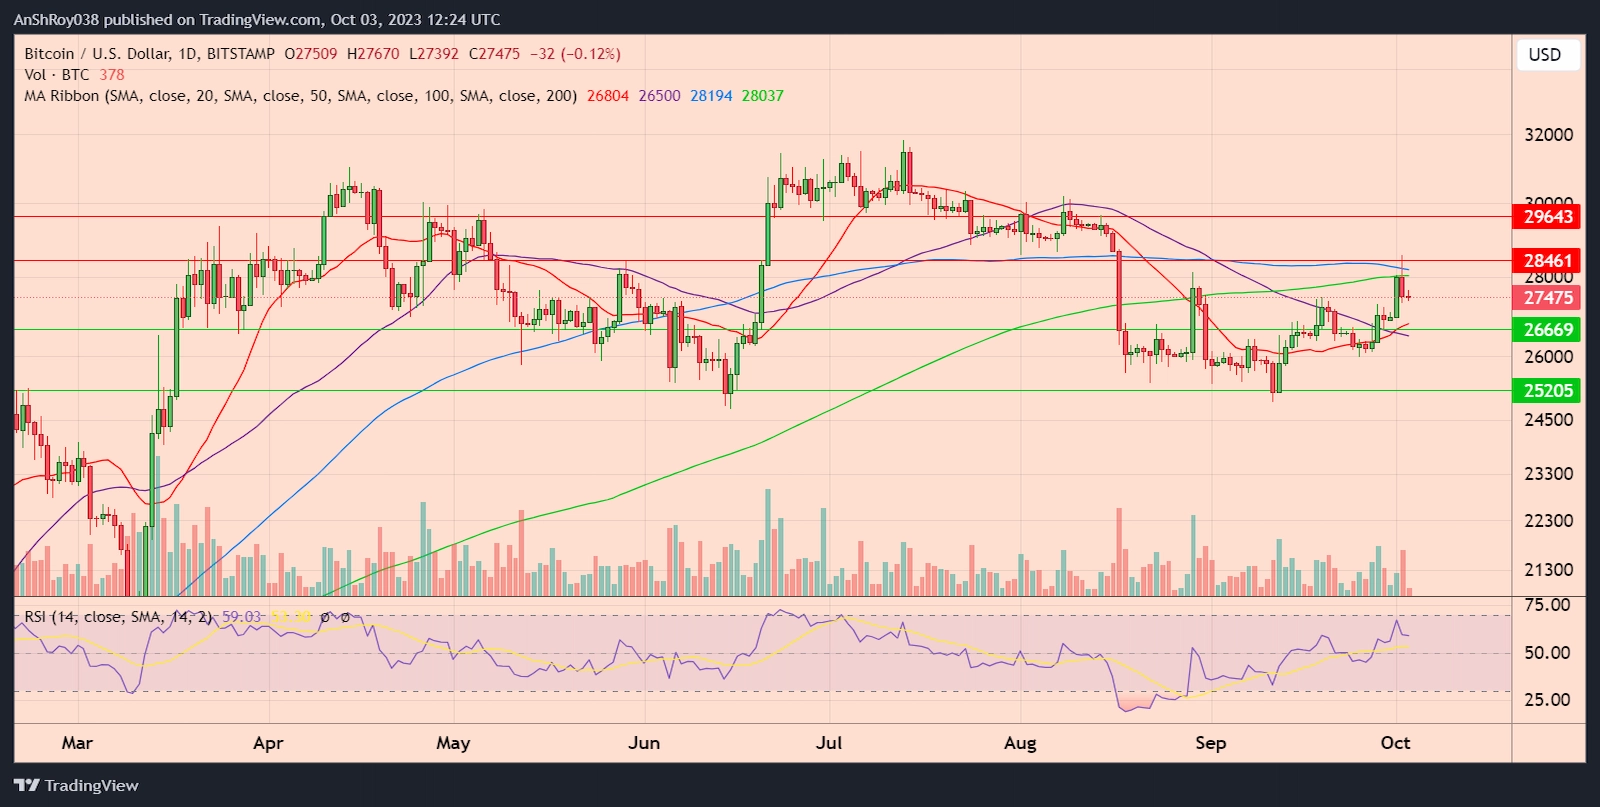 BTCUSD daily price chart with RSI. 